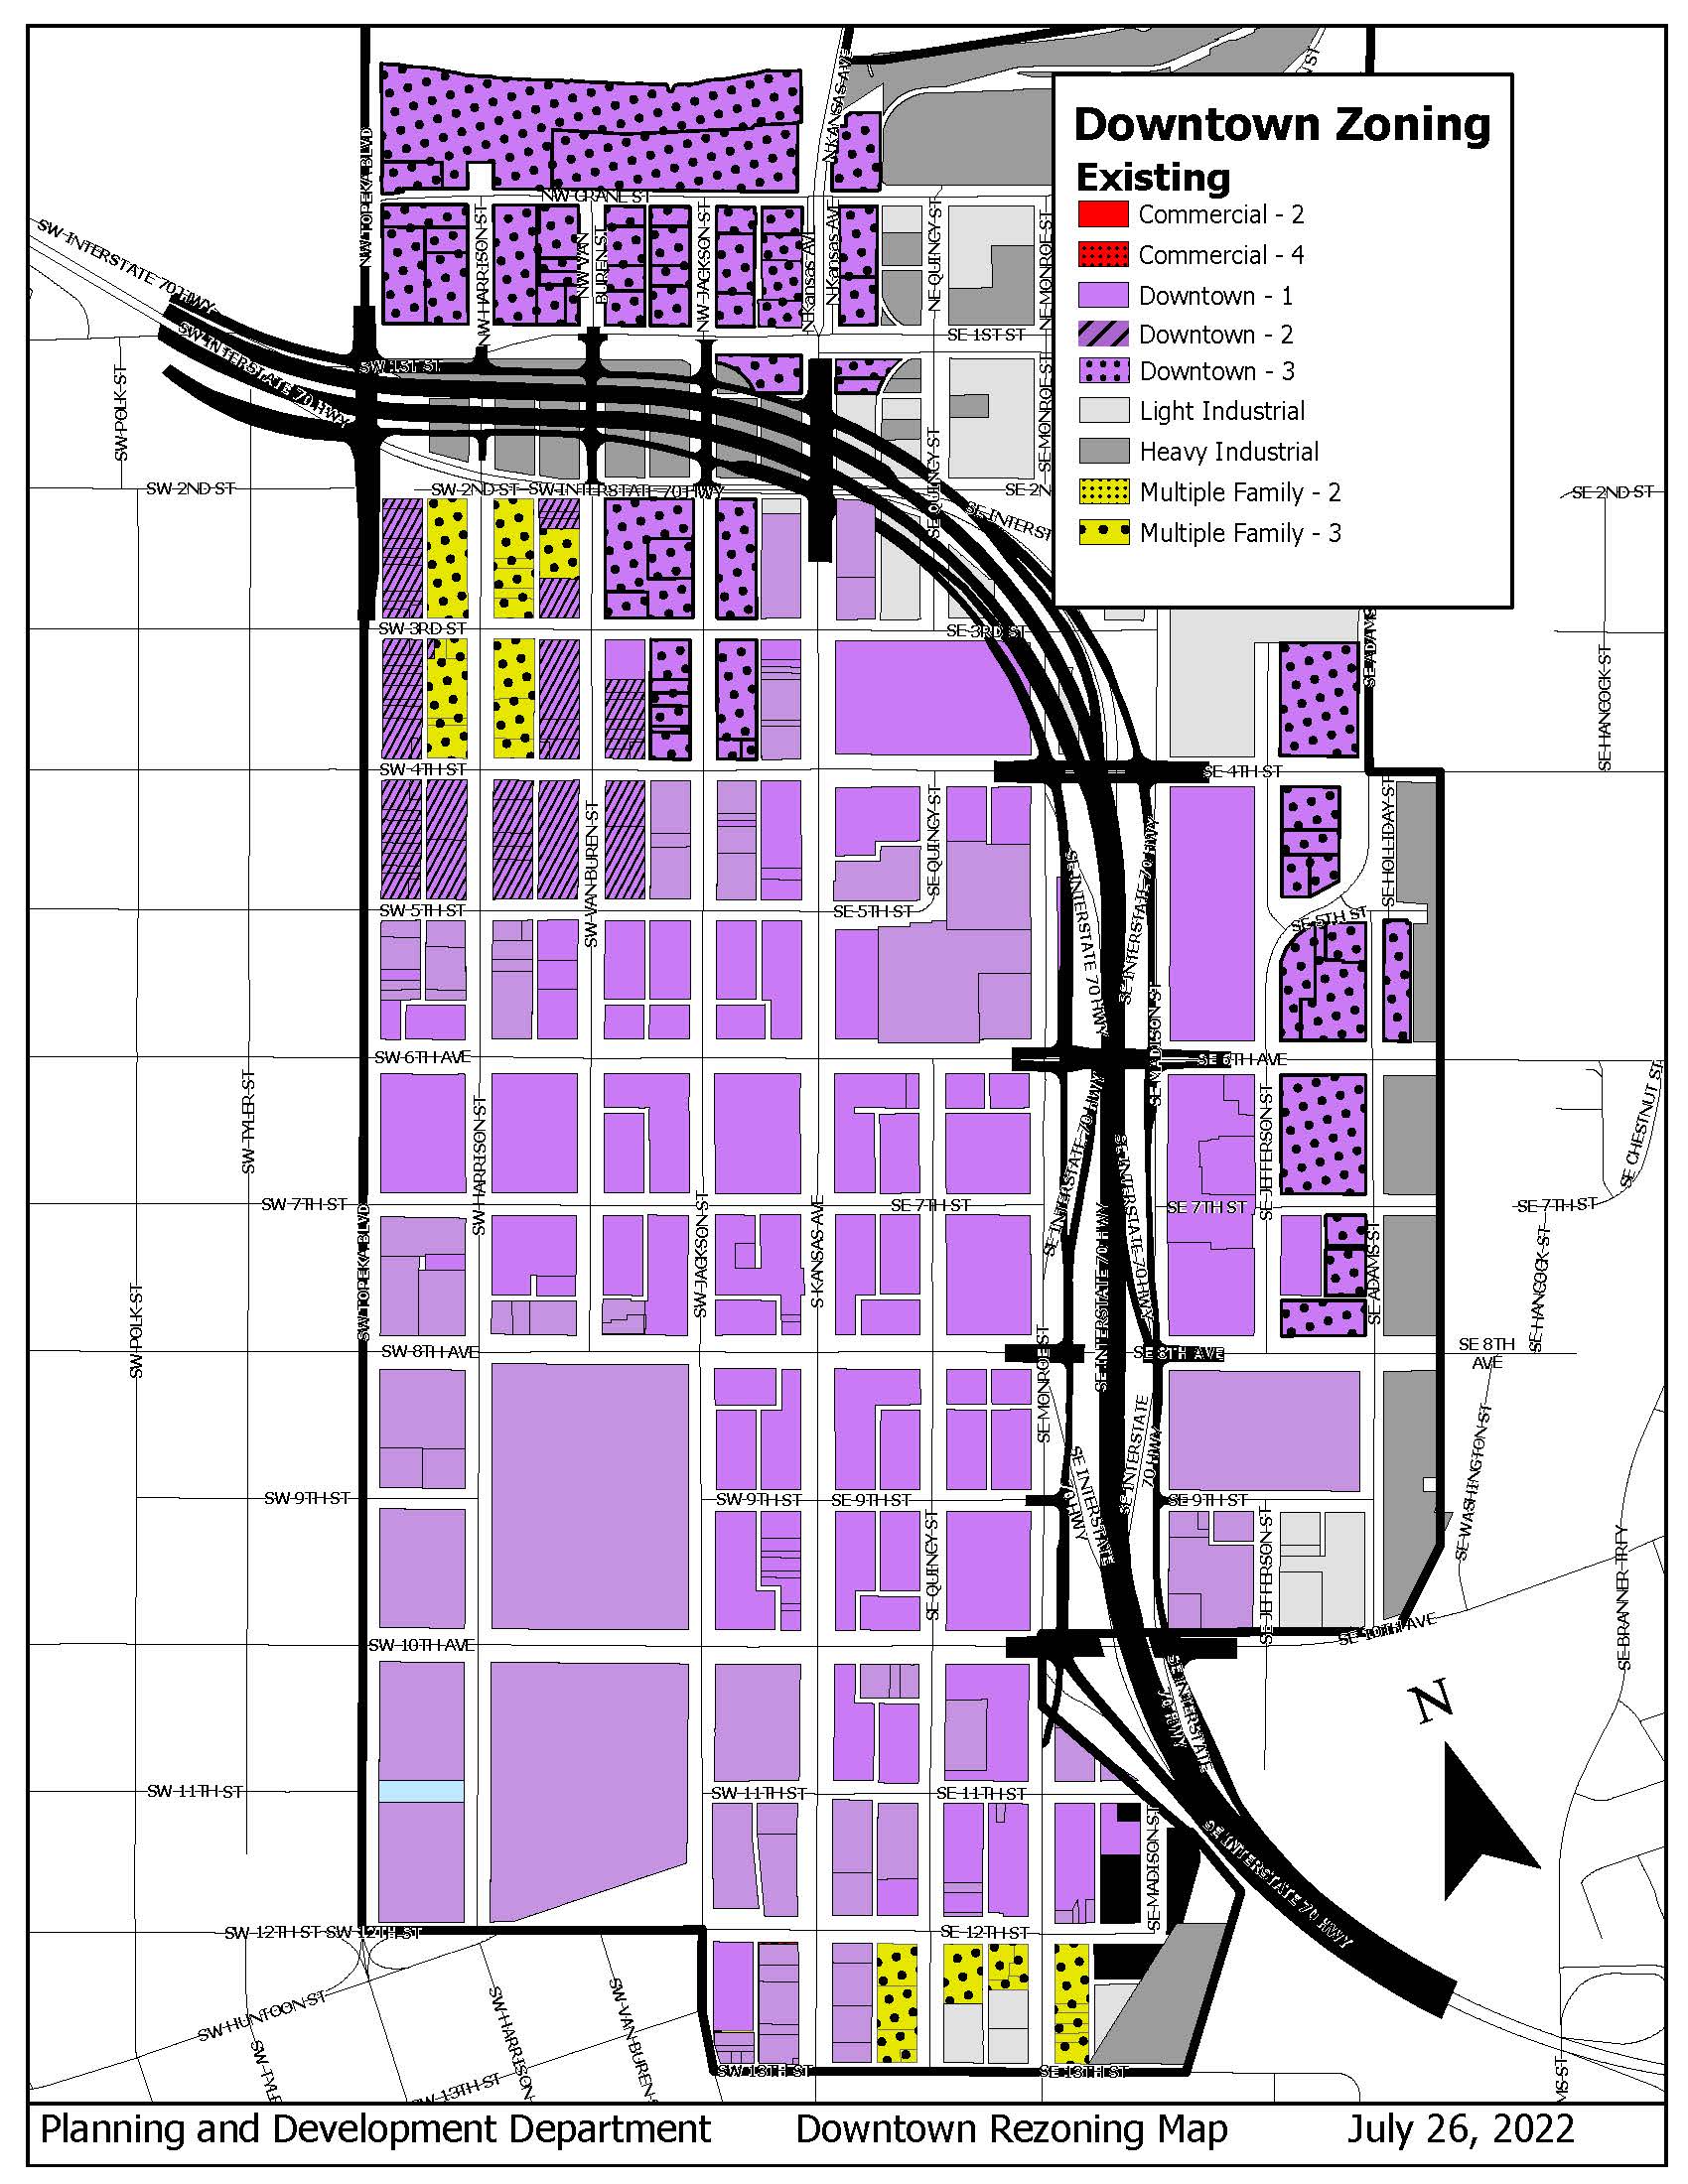 A map of the downtown D zoning districts